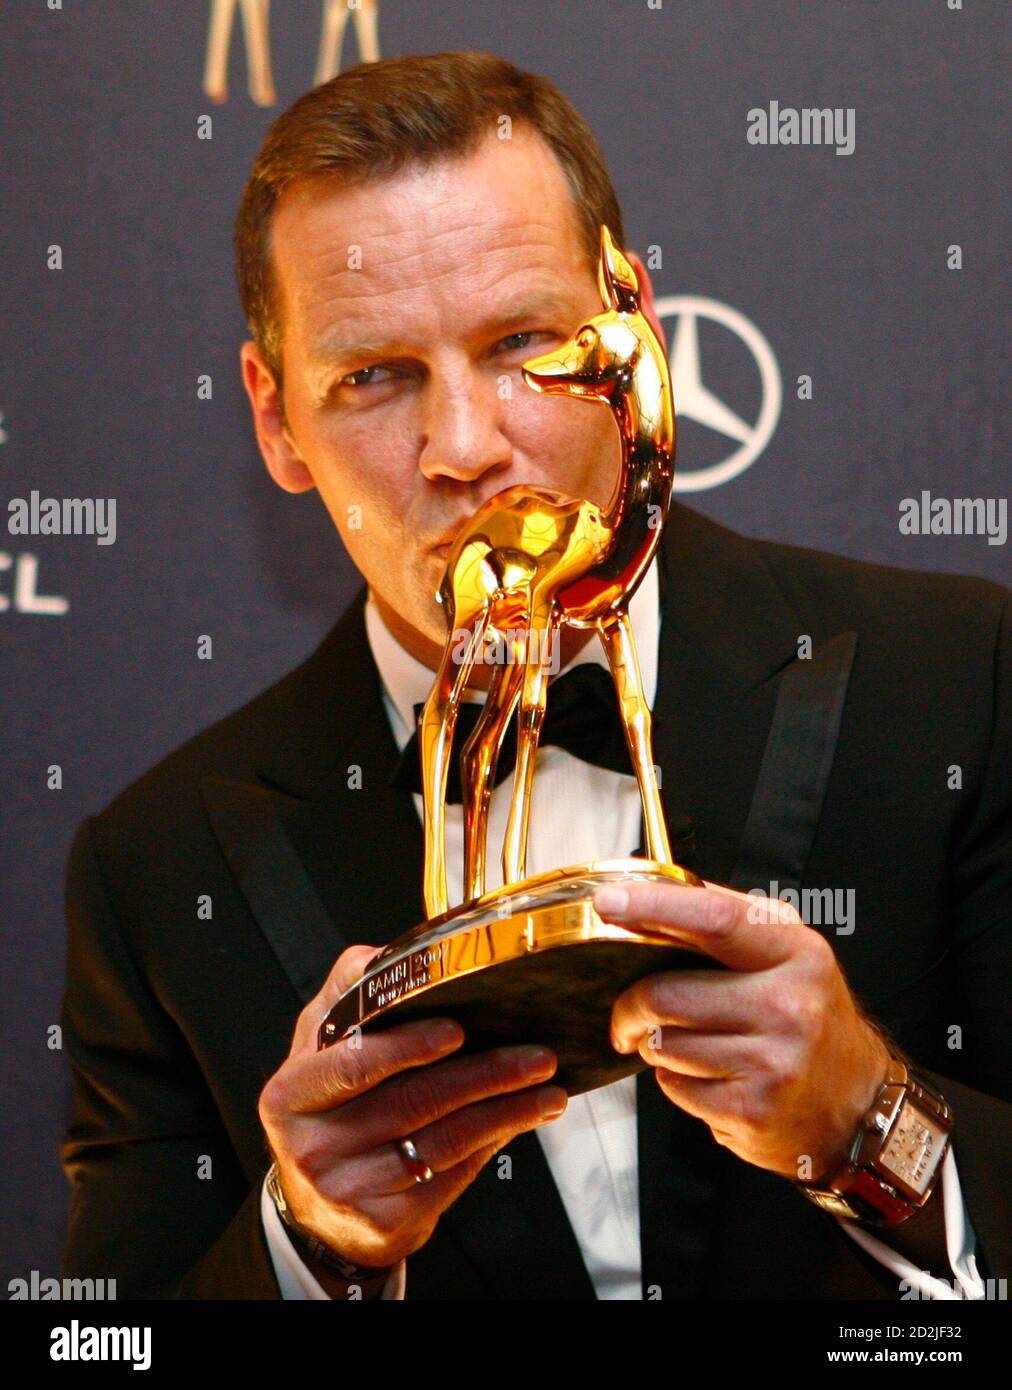 German boxer Henry Maske kisses his Bambi award during the 59th Bambi media  awards ceremony in the western German town of Duesseldorf November 29,  2007. Each year, the German media company 'Hubert